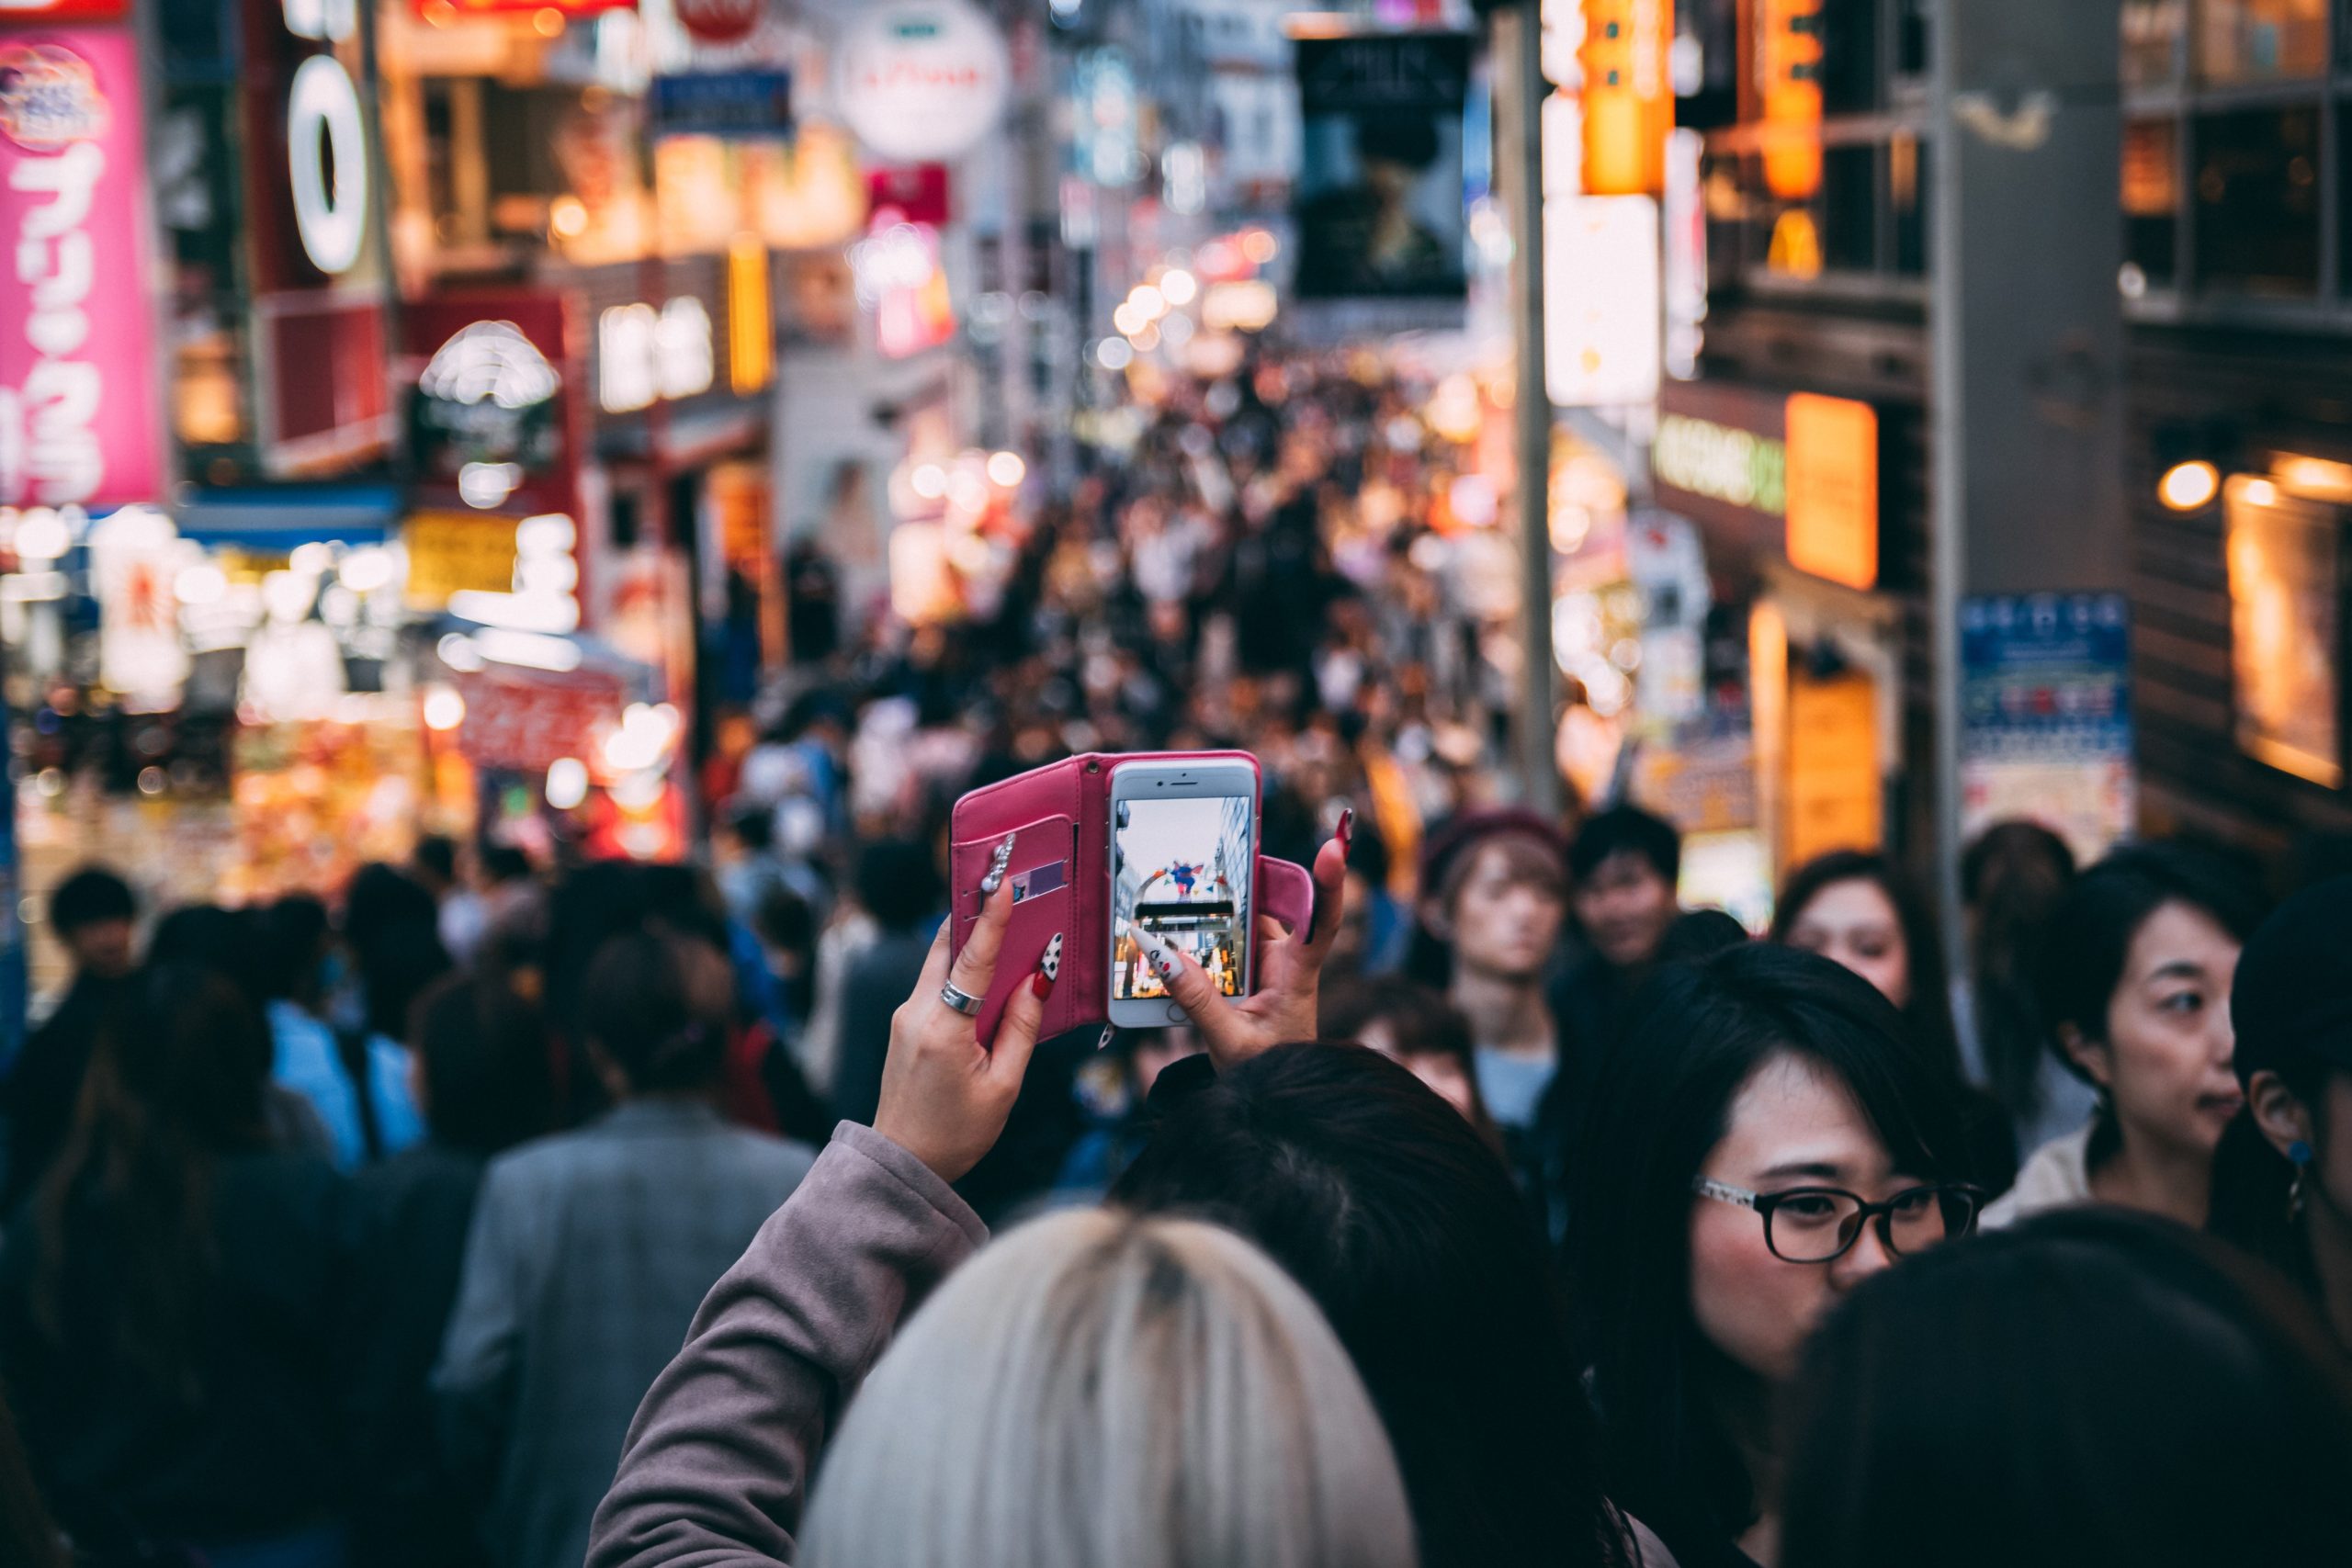 What is Edge Networking? A picture of a person holding a phone in a crowded area, representative of the type of edge computing needed for the next generation of connectivity and IoT devices.